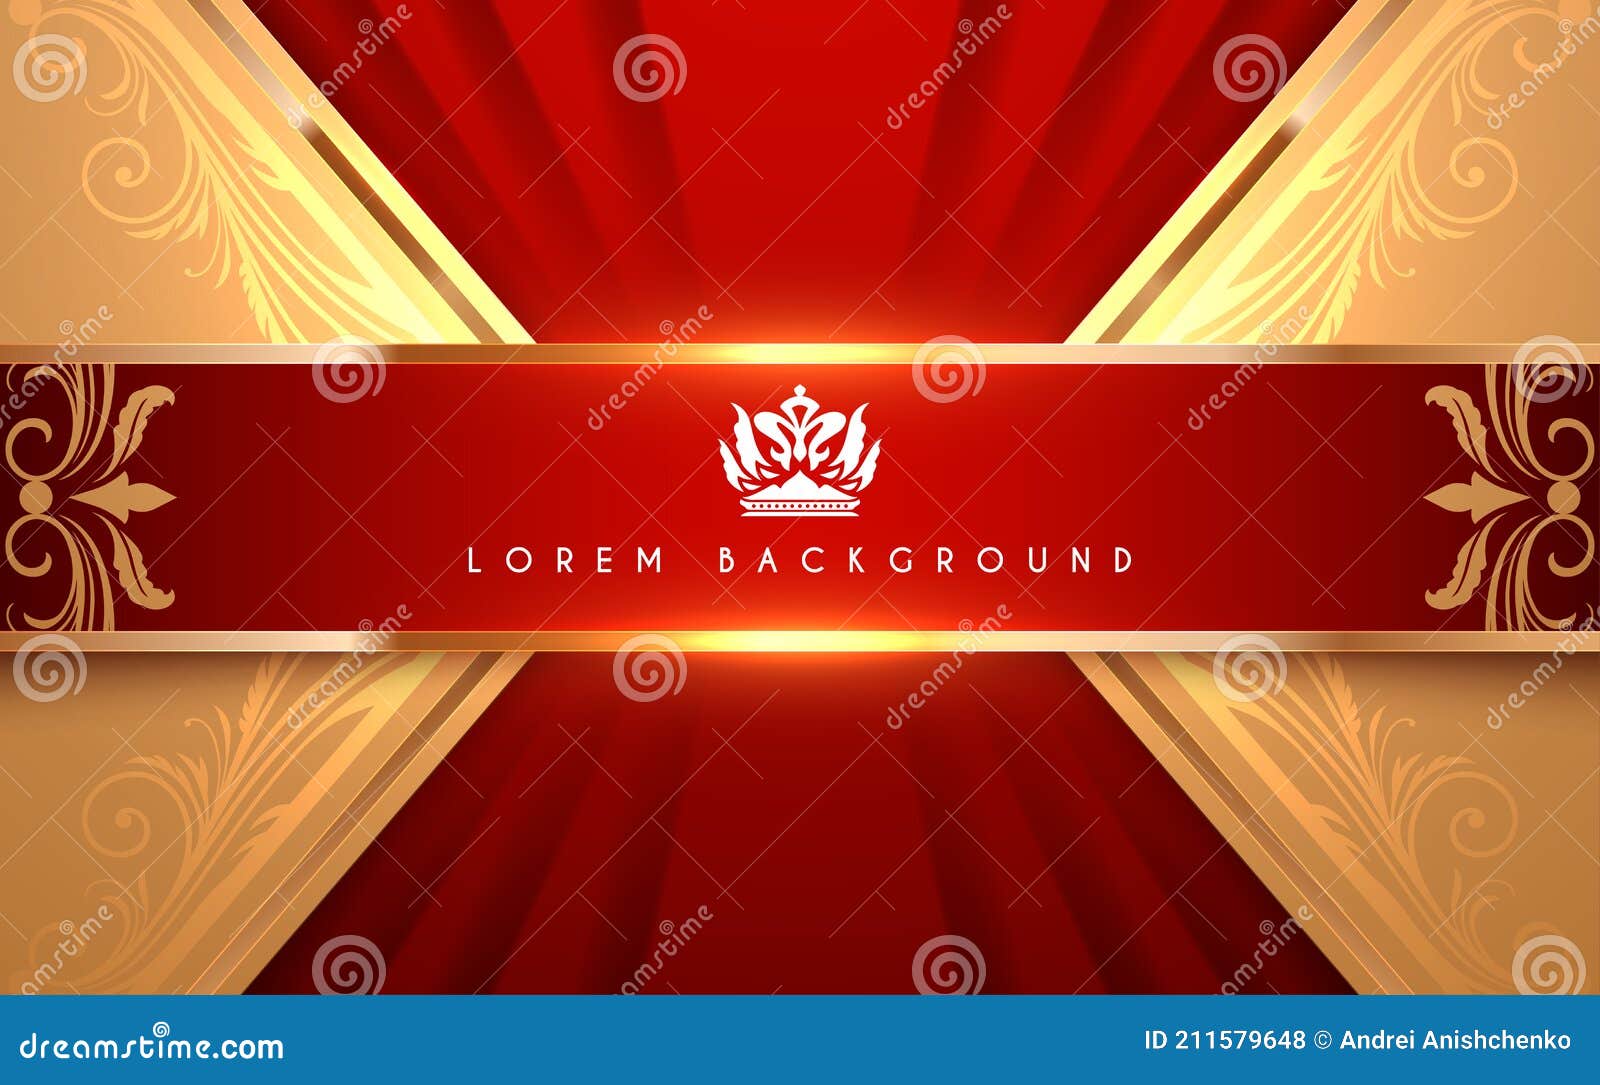 Abstract Red and Gold Luxury Background Stock Vector - Illustration of  flower, frame: 211579648